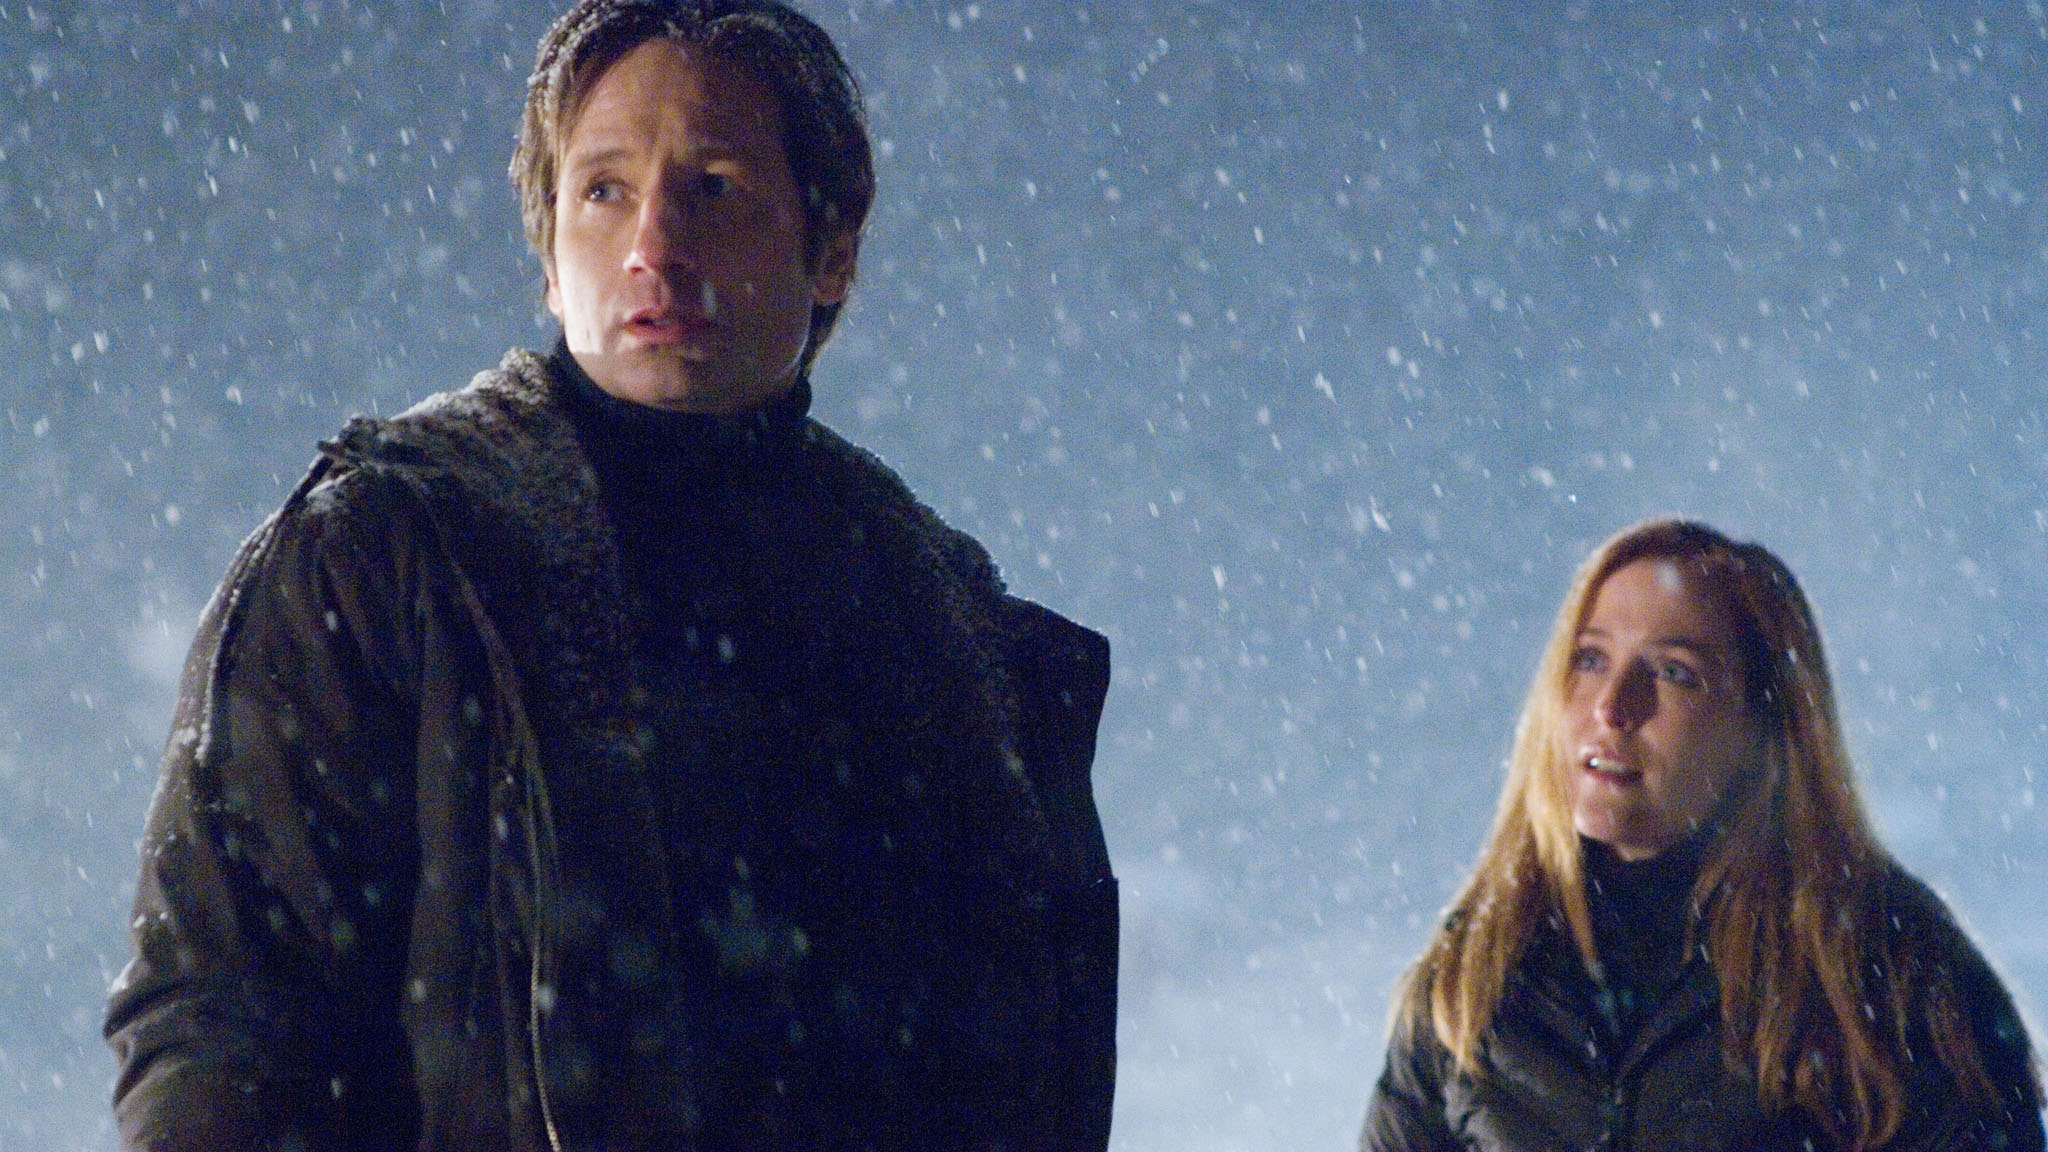 A still from the movie X Files I want to believe starring Gillian Anderson as Dana Scully and David Duchovny as Fox Mudler standing in a snowstorm